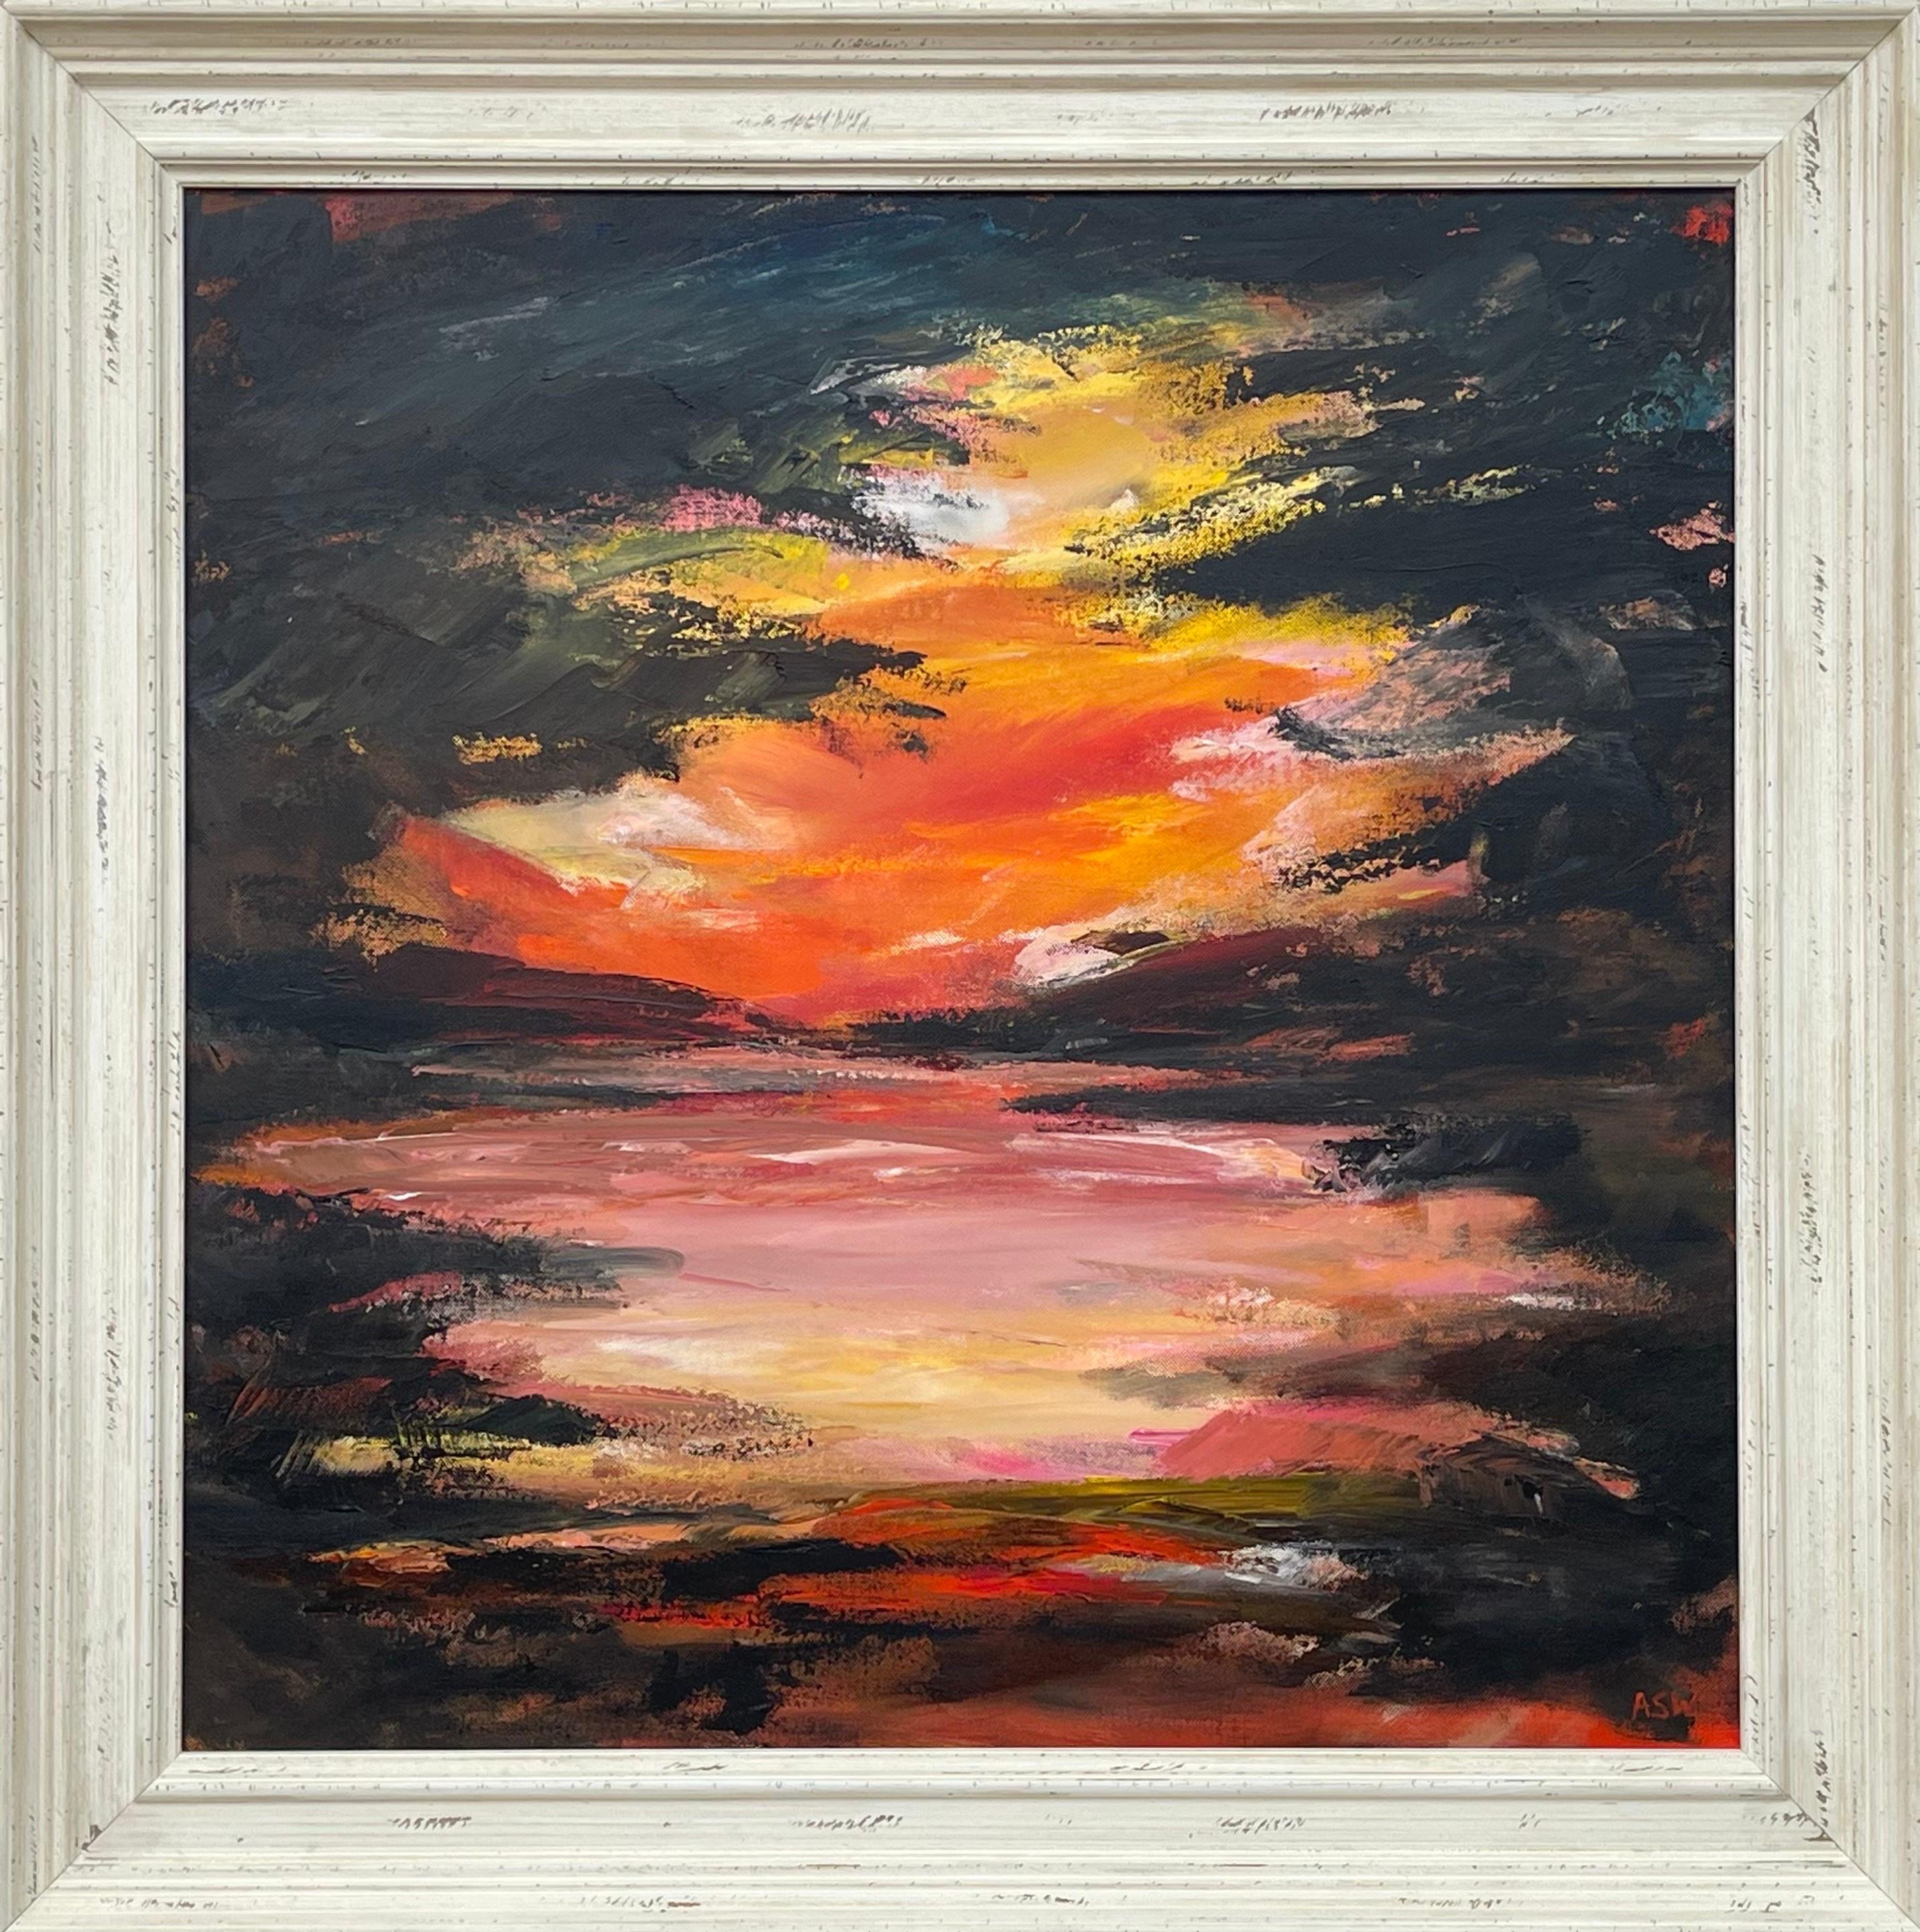 Black Orange & Yellow Abstract Landscape Painting by Contemporary British Artist